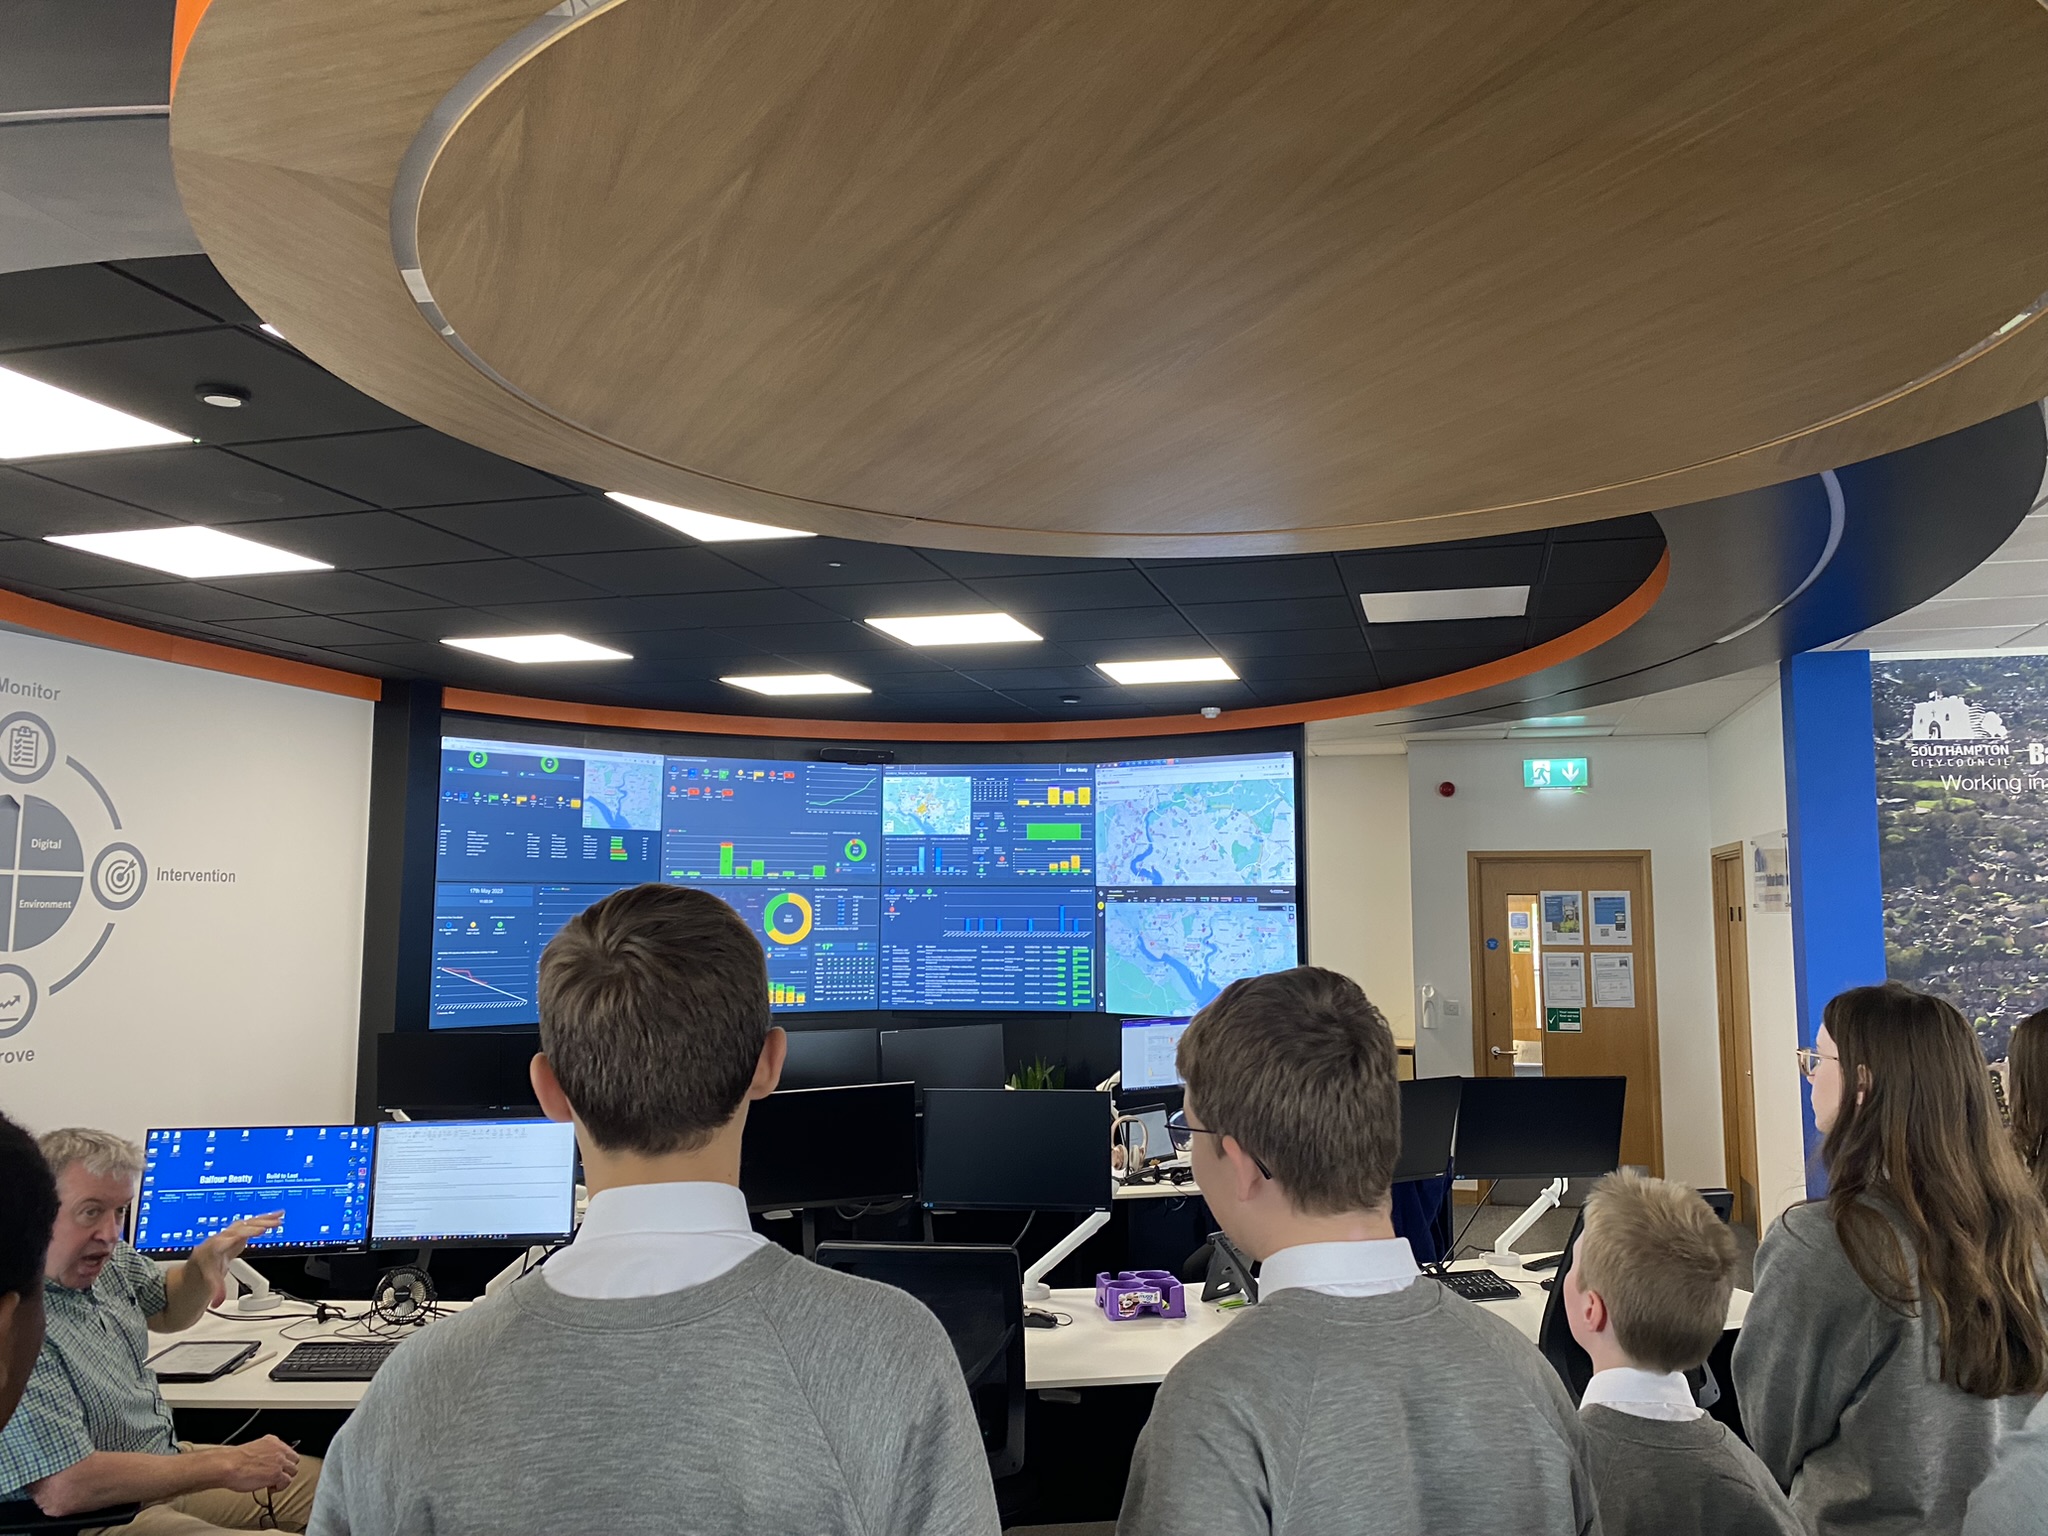 Balfour Beatty Coding day - pupils and computer screen